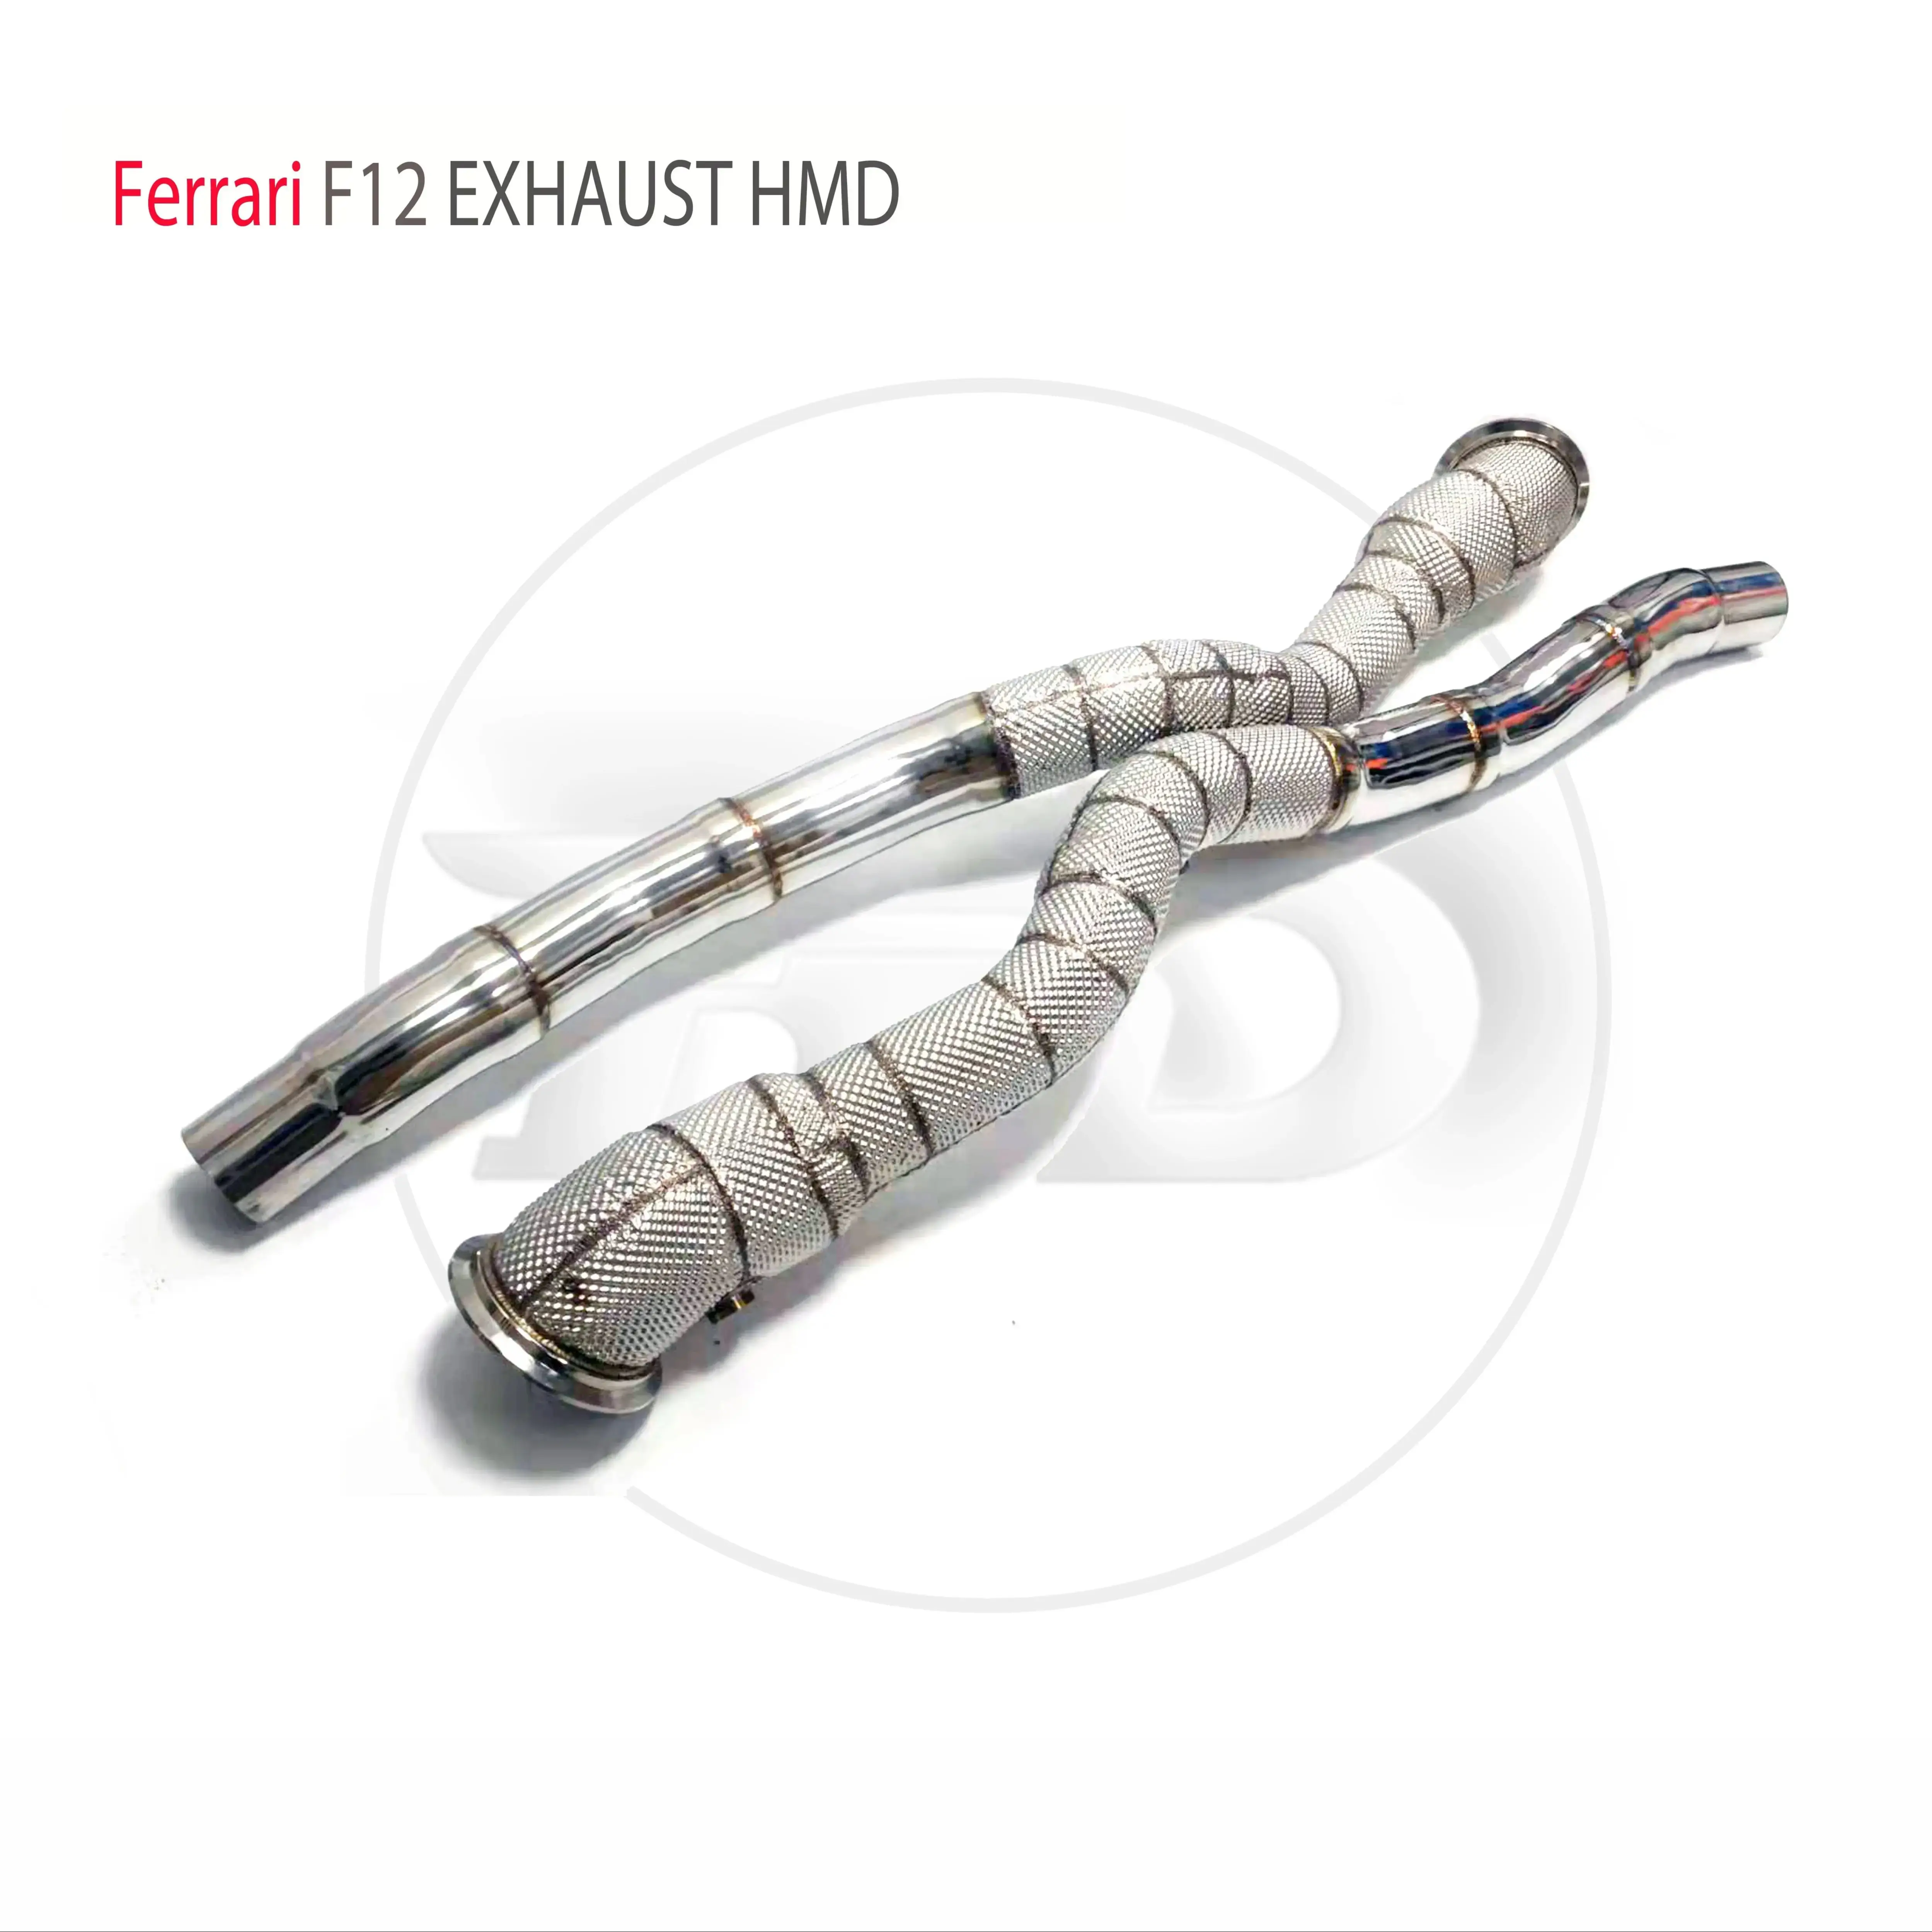 

HMD Exhaust Downpipe for Ferrari F12 Car Accessories Muffler With Catalytic Converter Header Without Cat Pipe